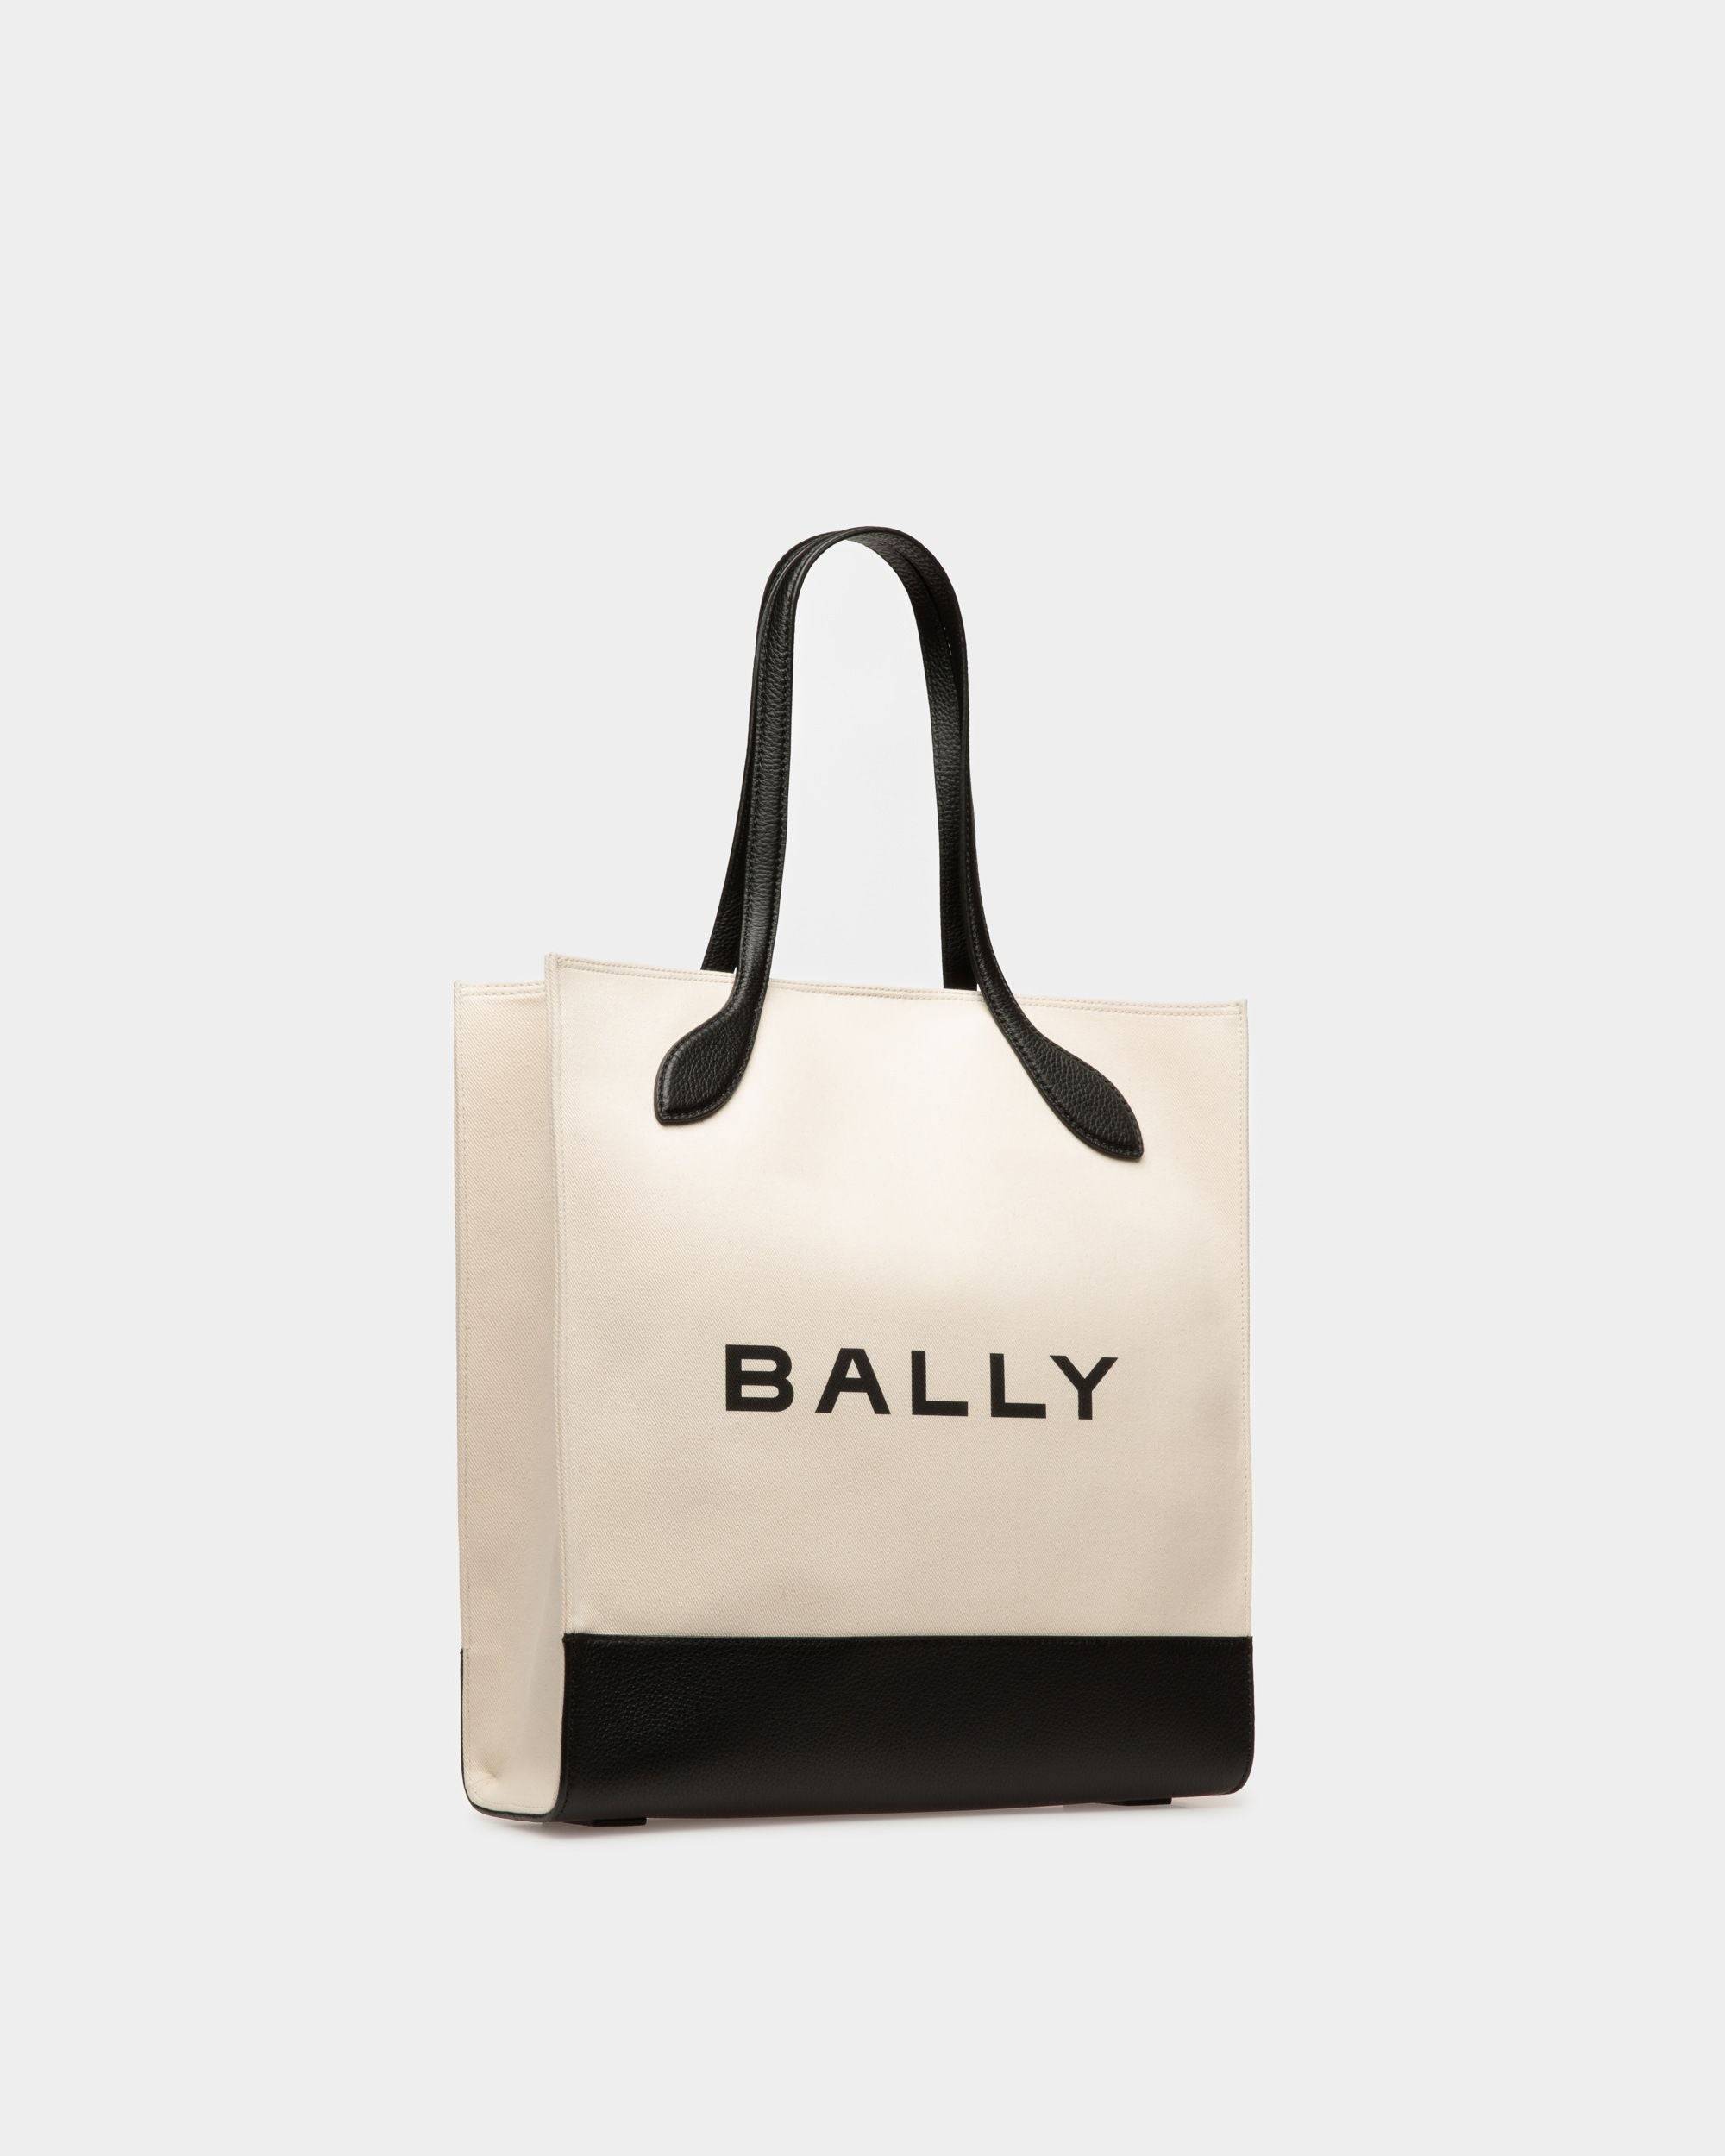 Keep On | Women's Tote Bag | Natural And Black Fabric | Bally | Still Life 3/4 Front